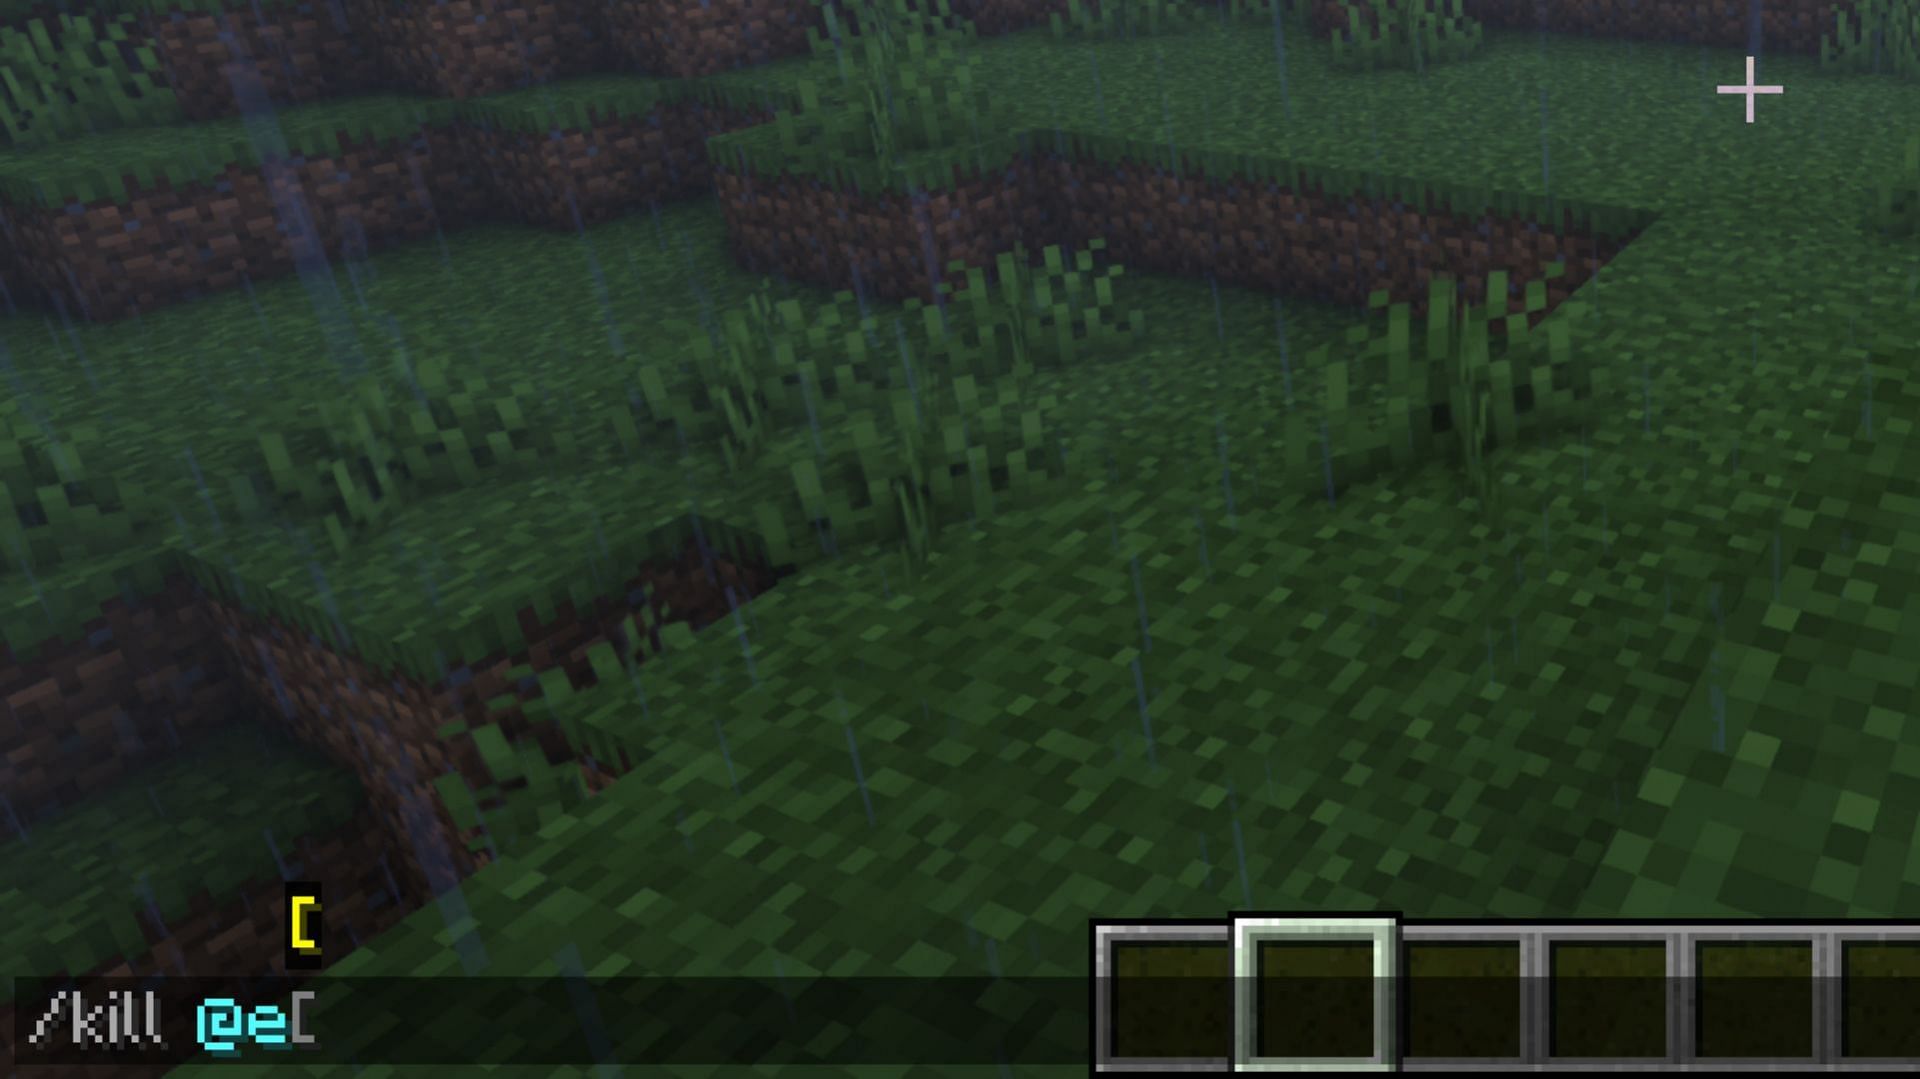 Kill command to kill everyone including the player (Image via Minecraft 1.19 update)